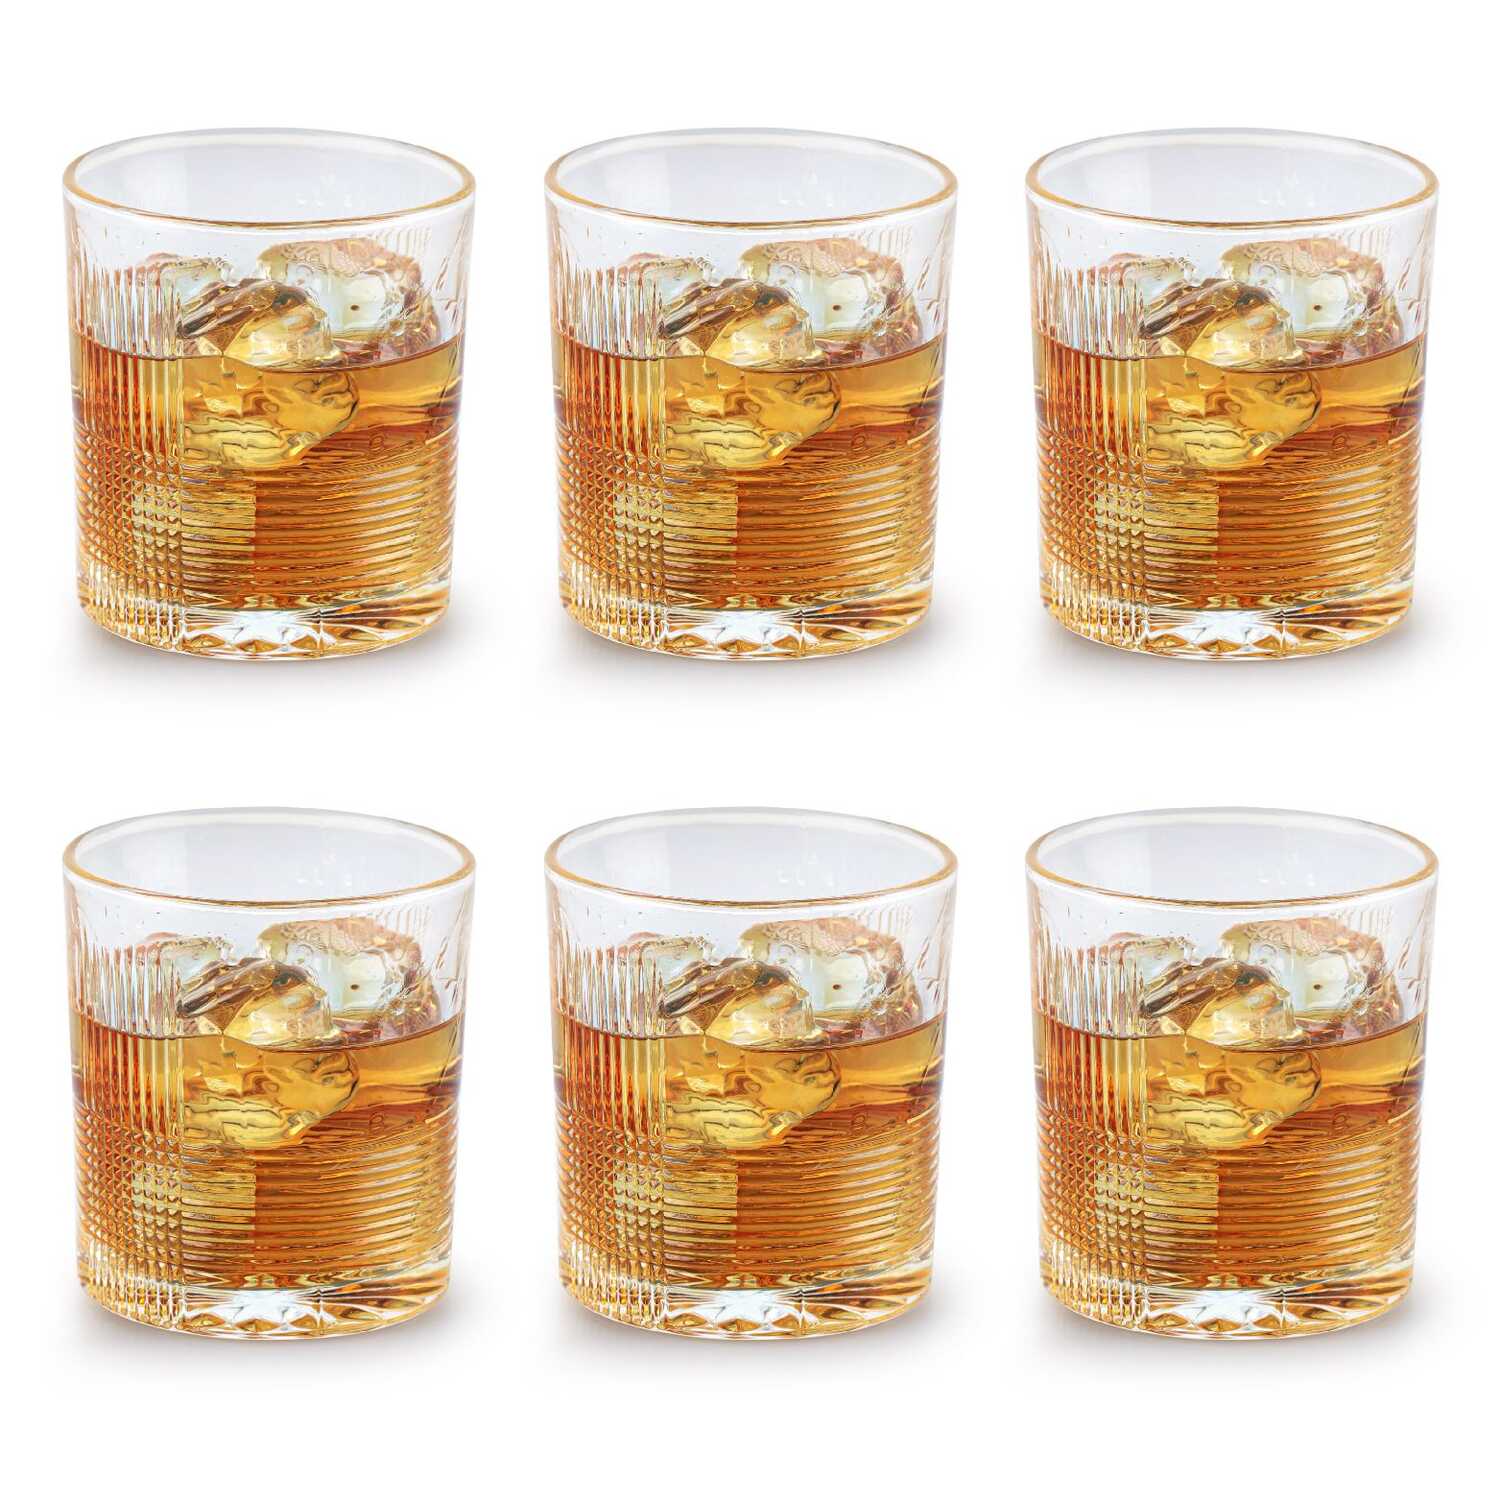 Enigma Glass Tumblers, Set of 6 Clear / 325ml / 6 Piece